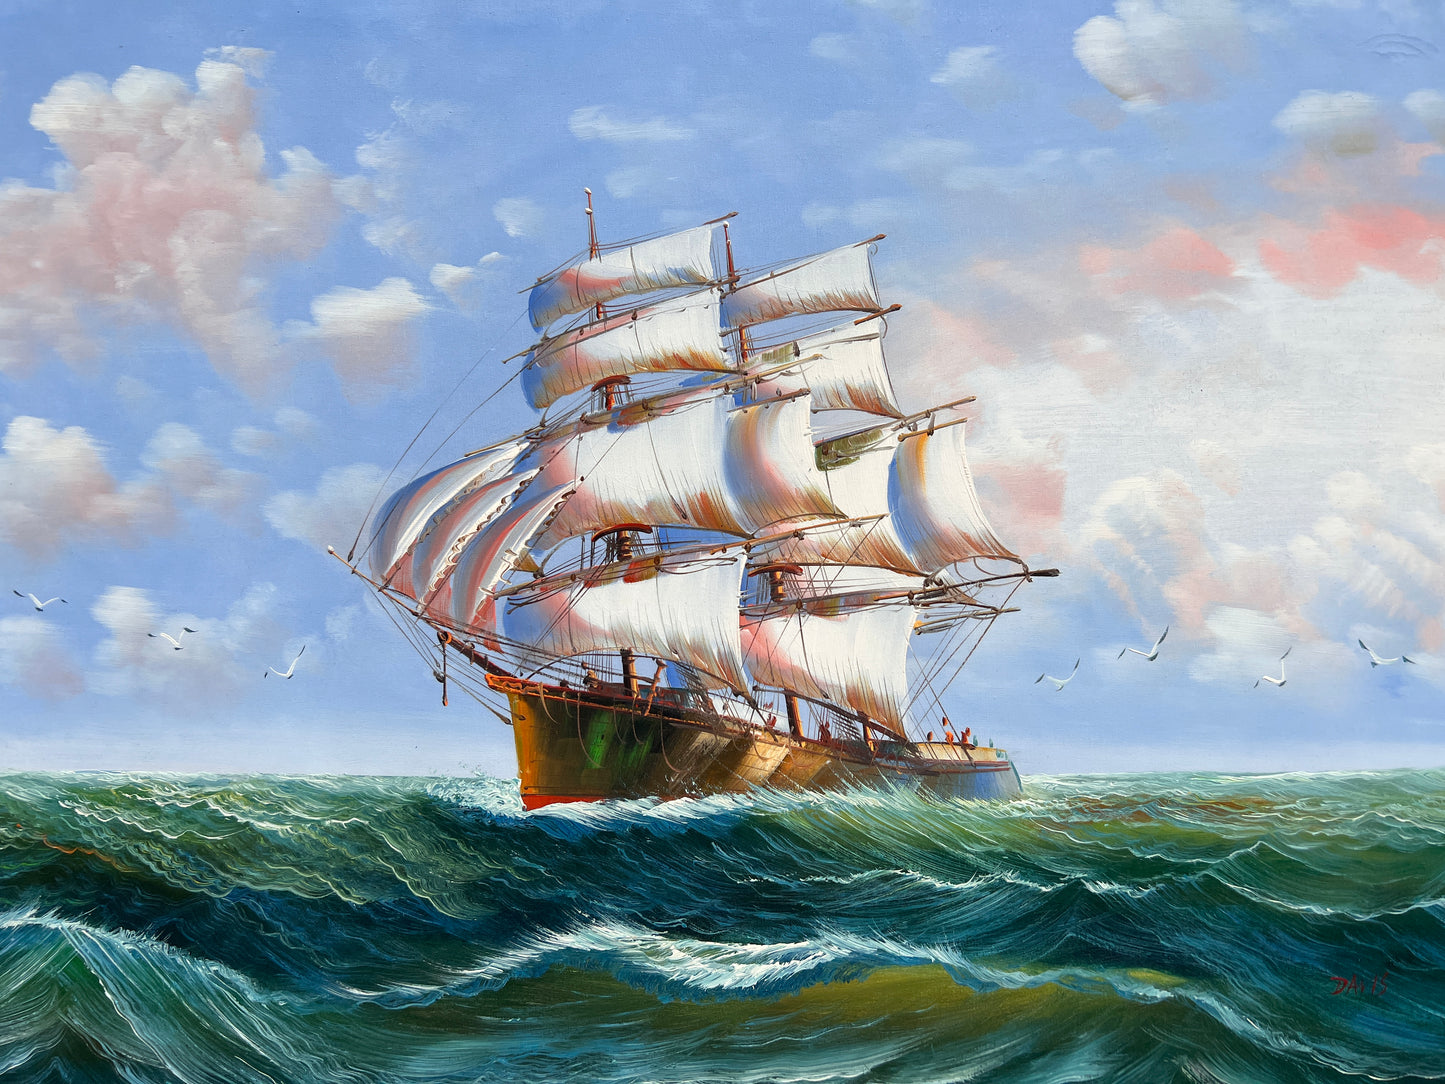 Davis Large Oil painting on canvas, Seascape, Sailing Ship in the ocean, Framed